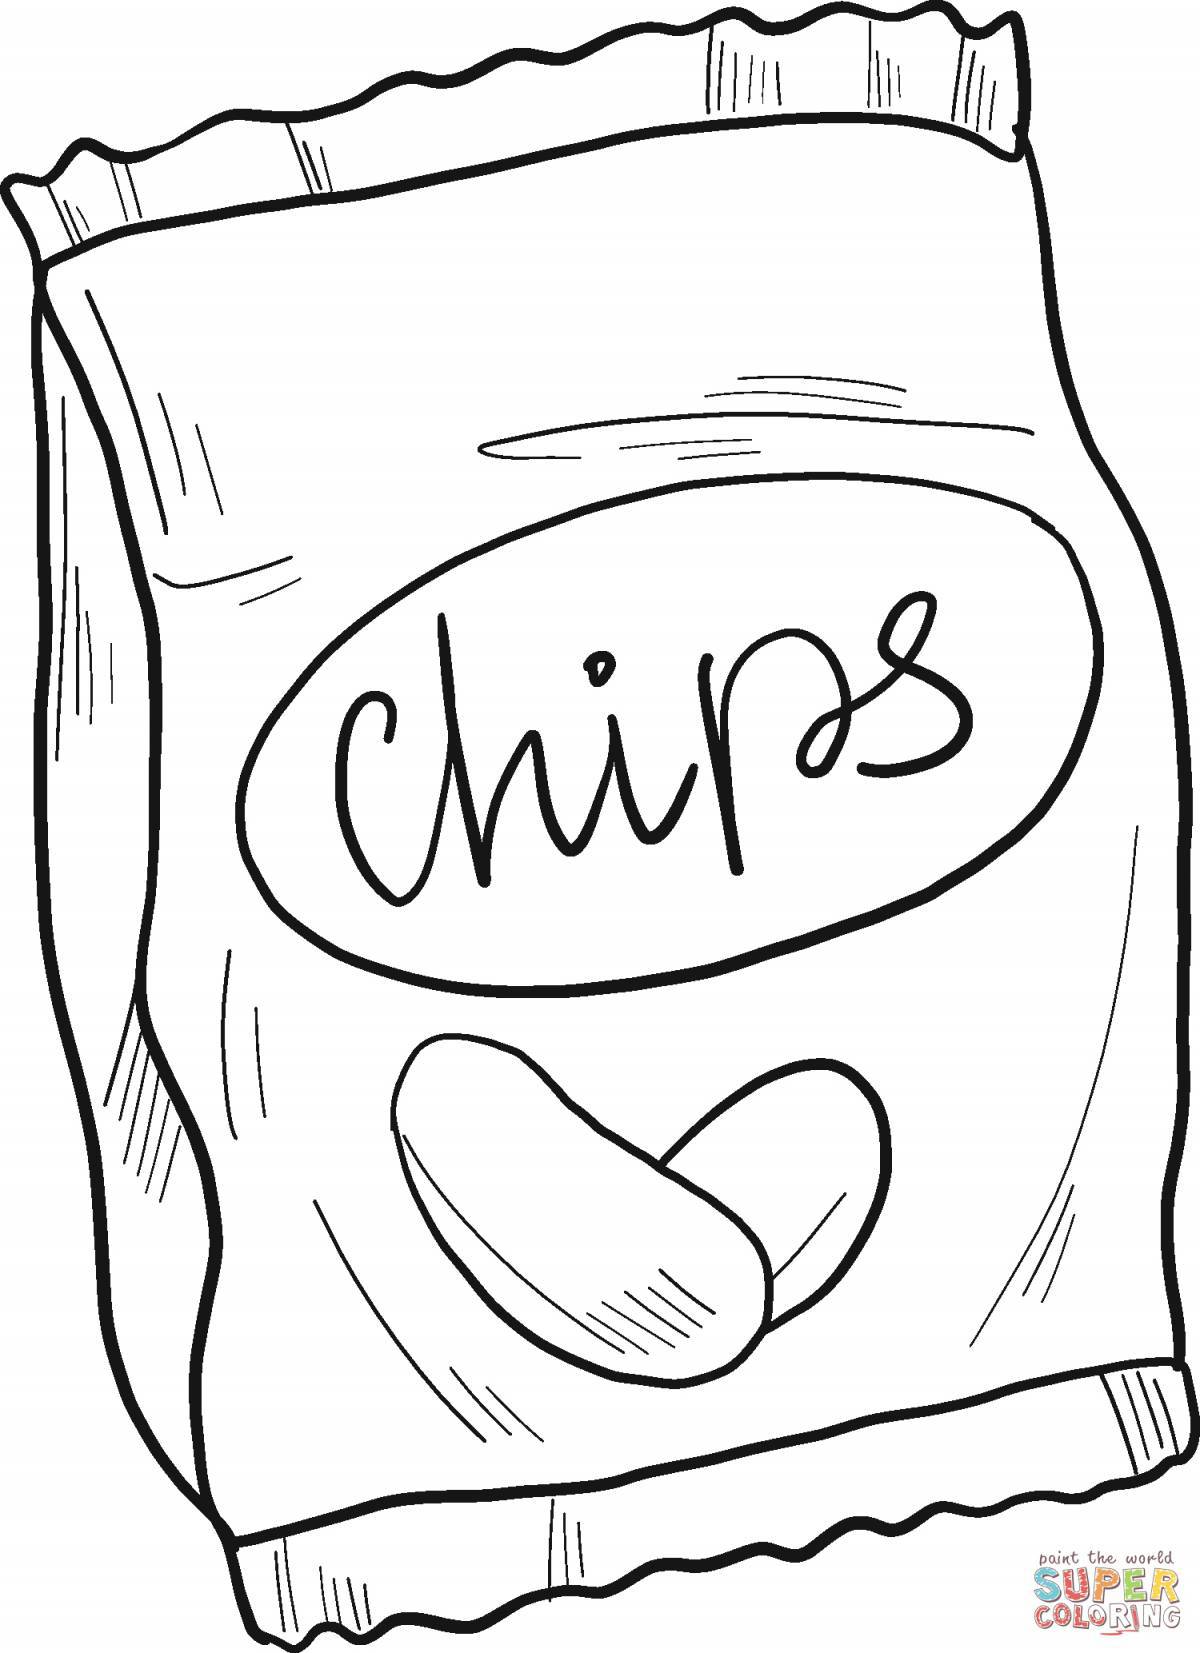 Colored live chips coloring book